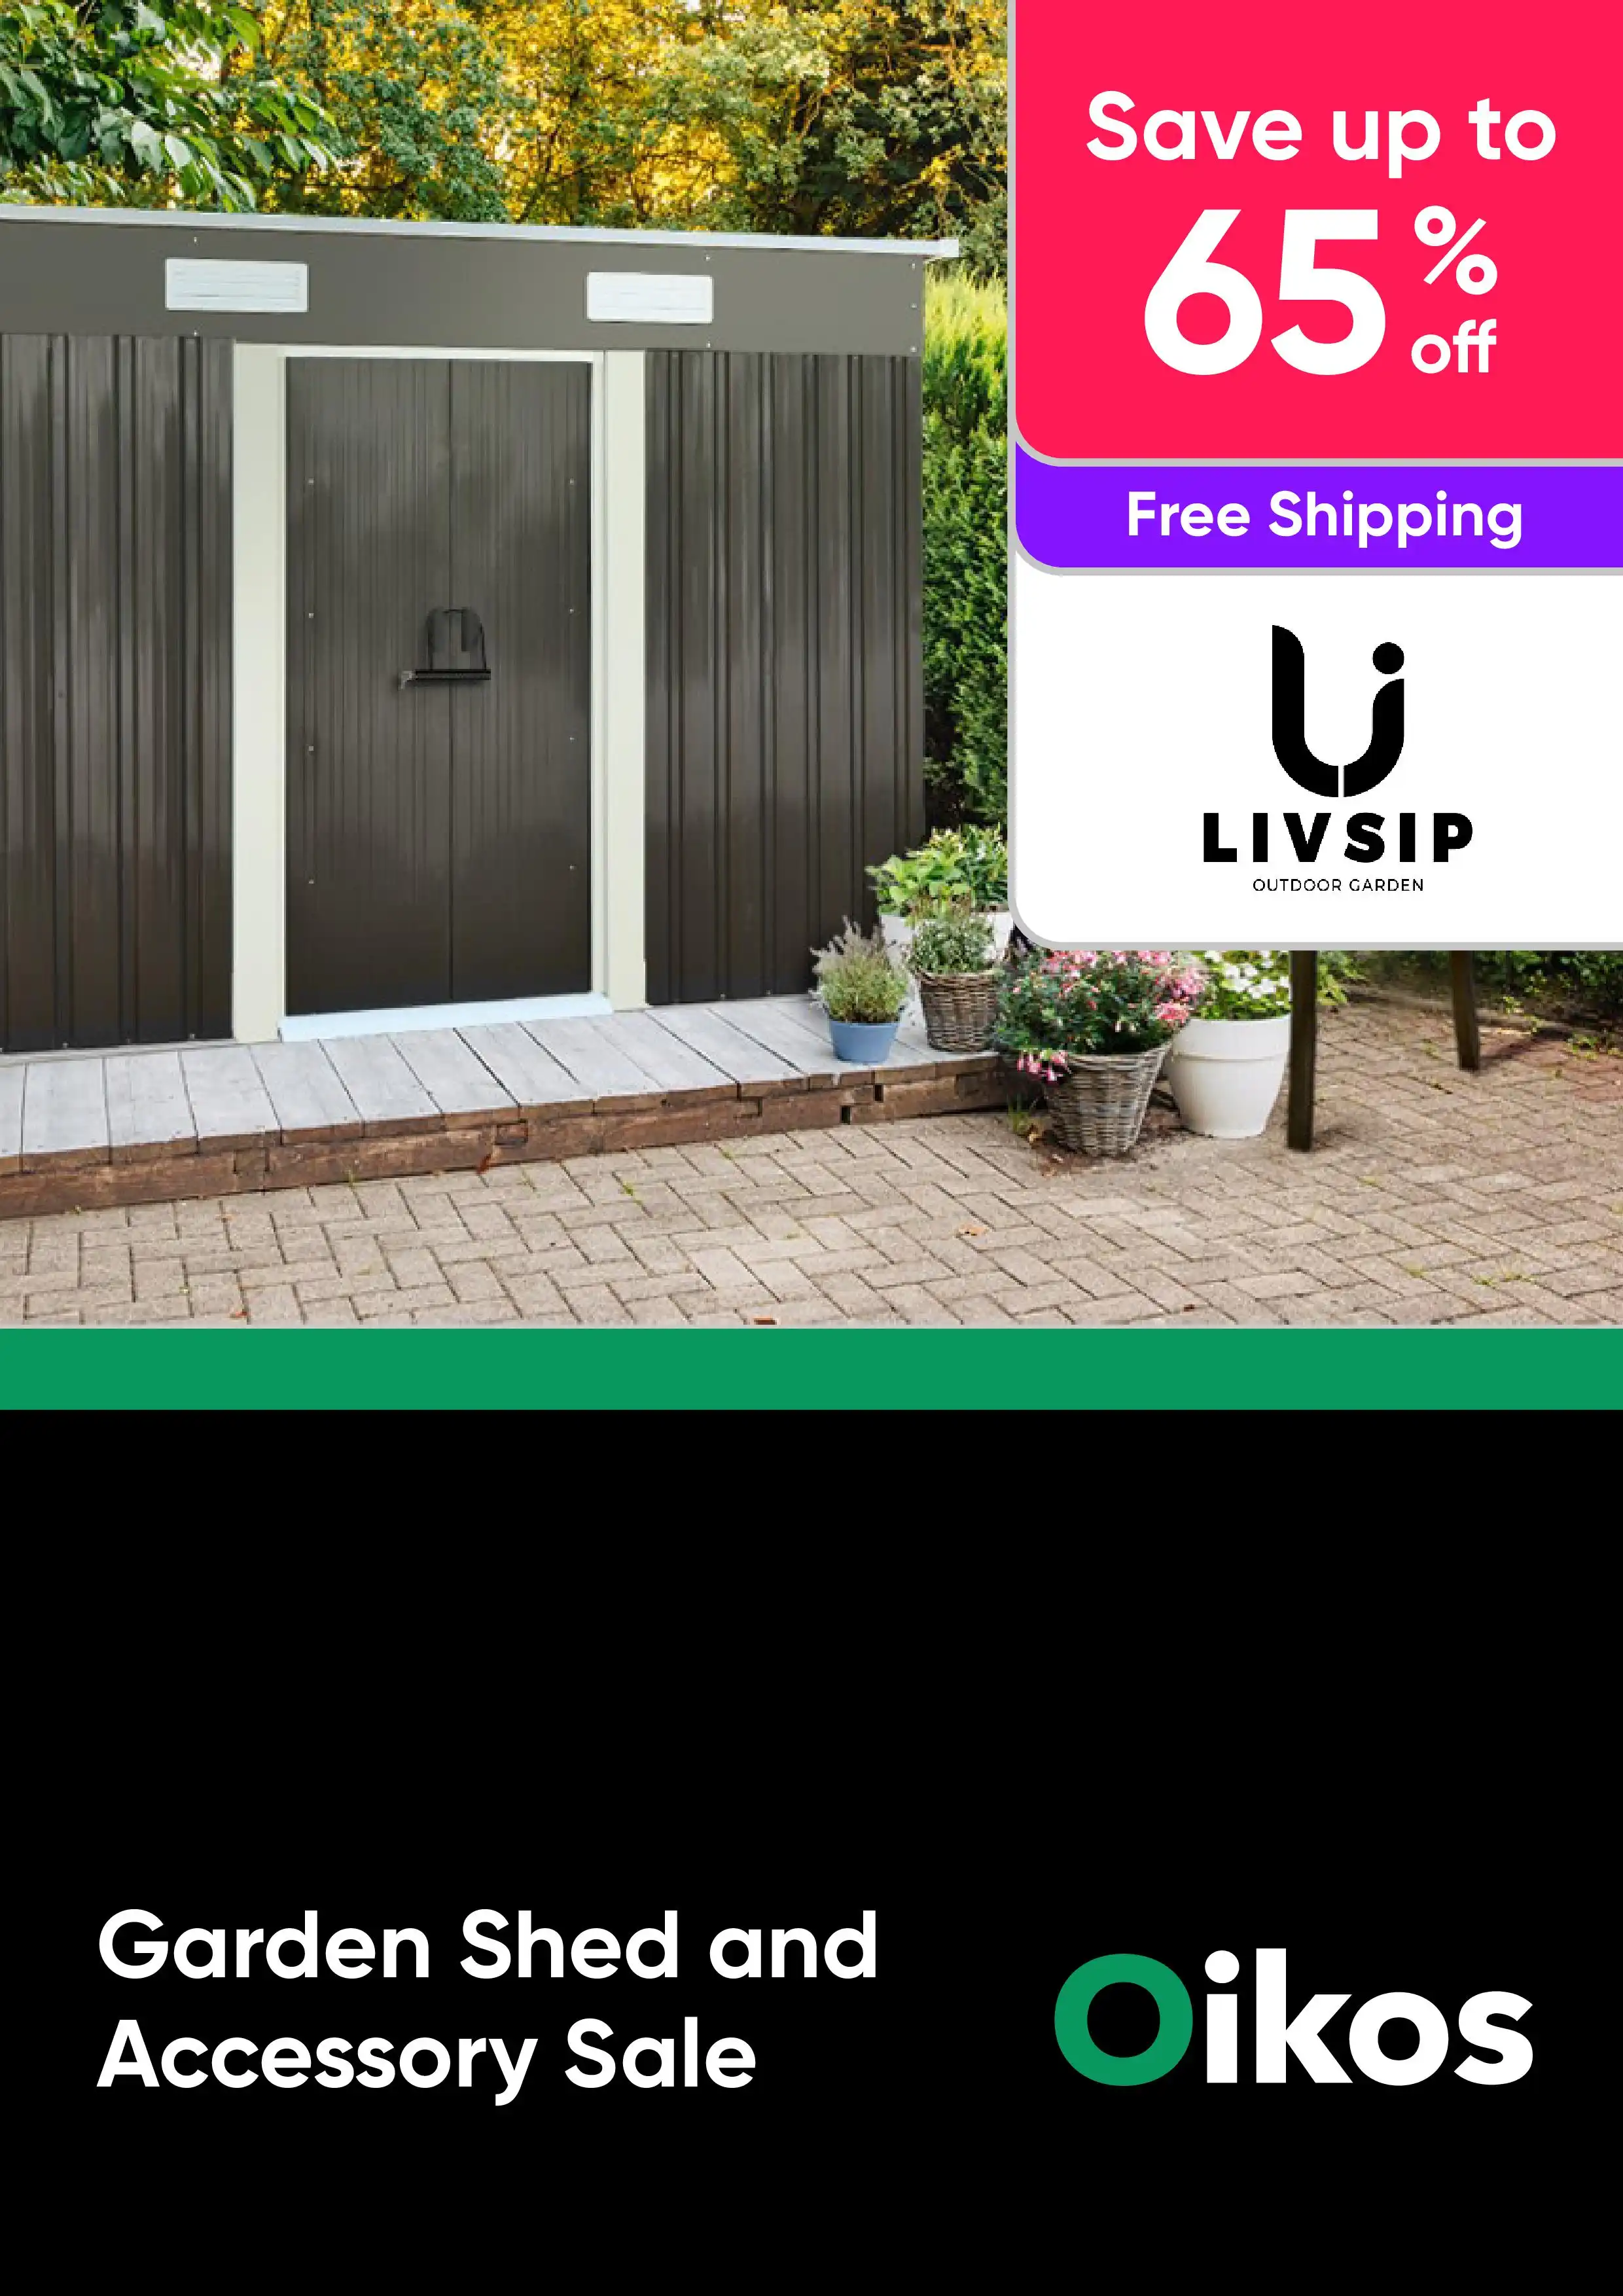 Garden Shed and Accessory Sale - Garden Sheds, Garden Benches - Livsip